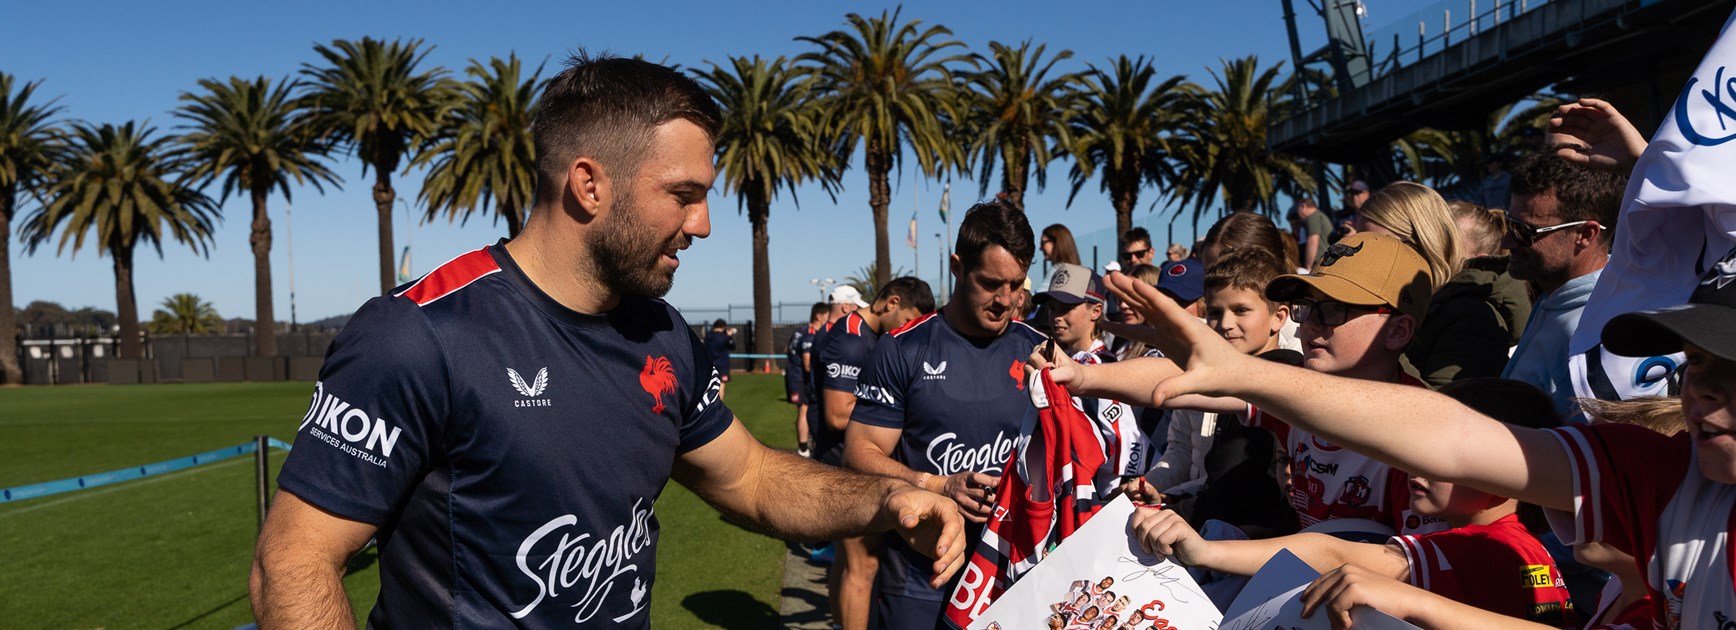 Sydney Roosters to Make Positive Change with Community Corner Initiative